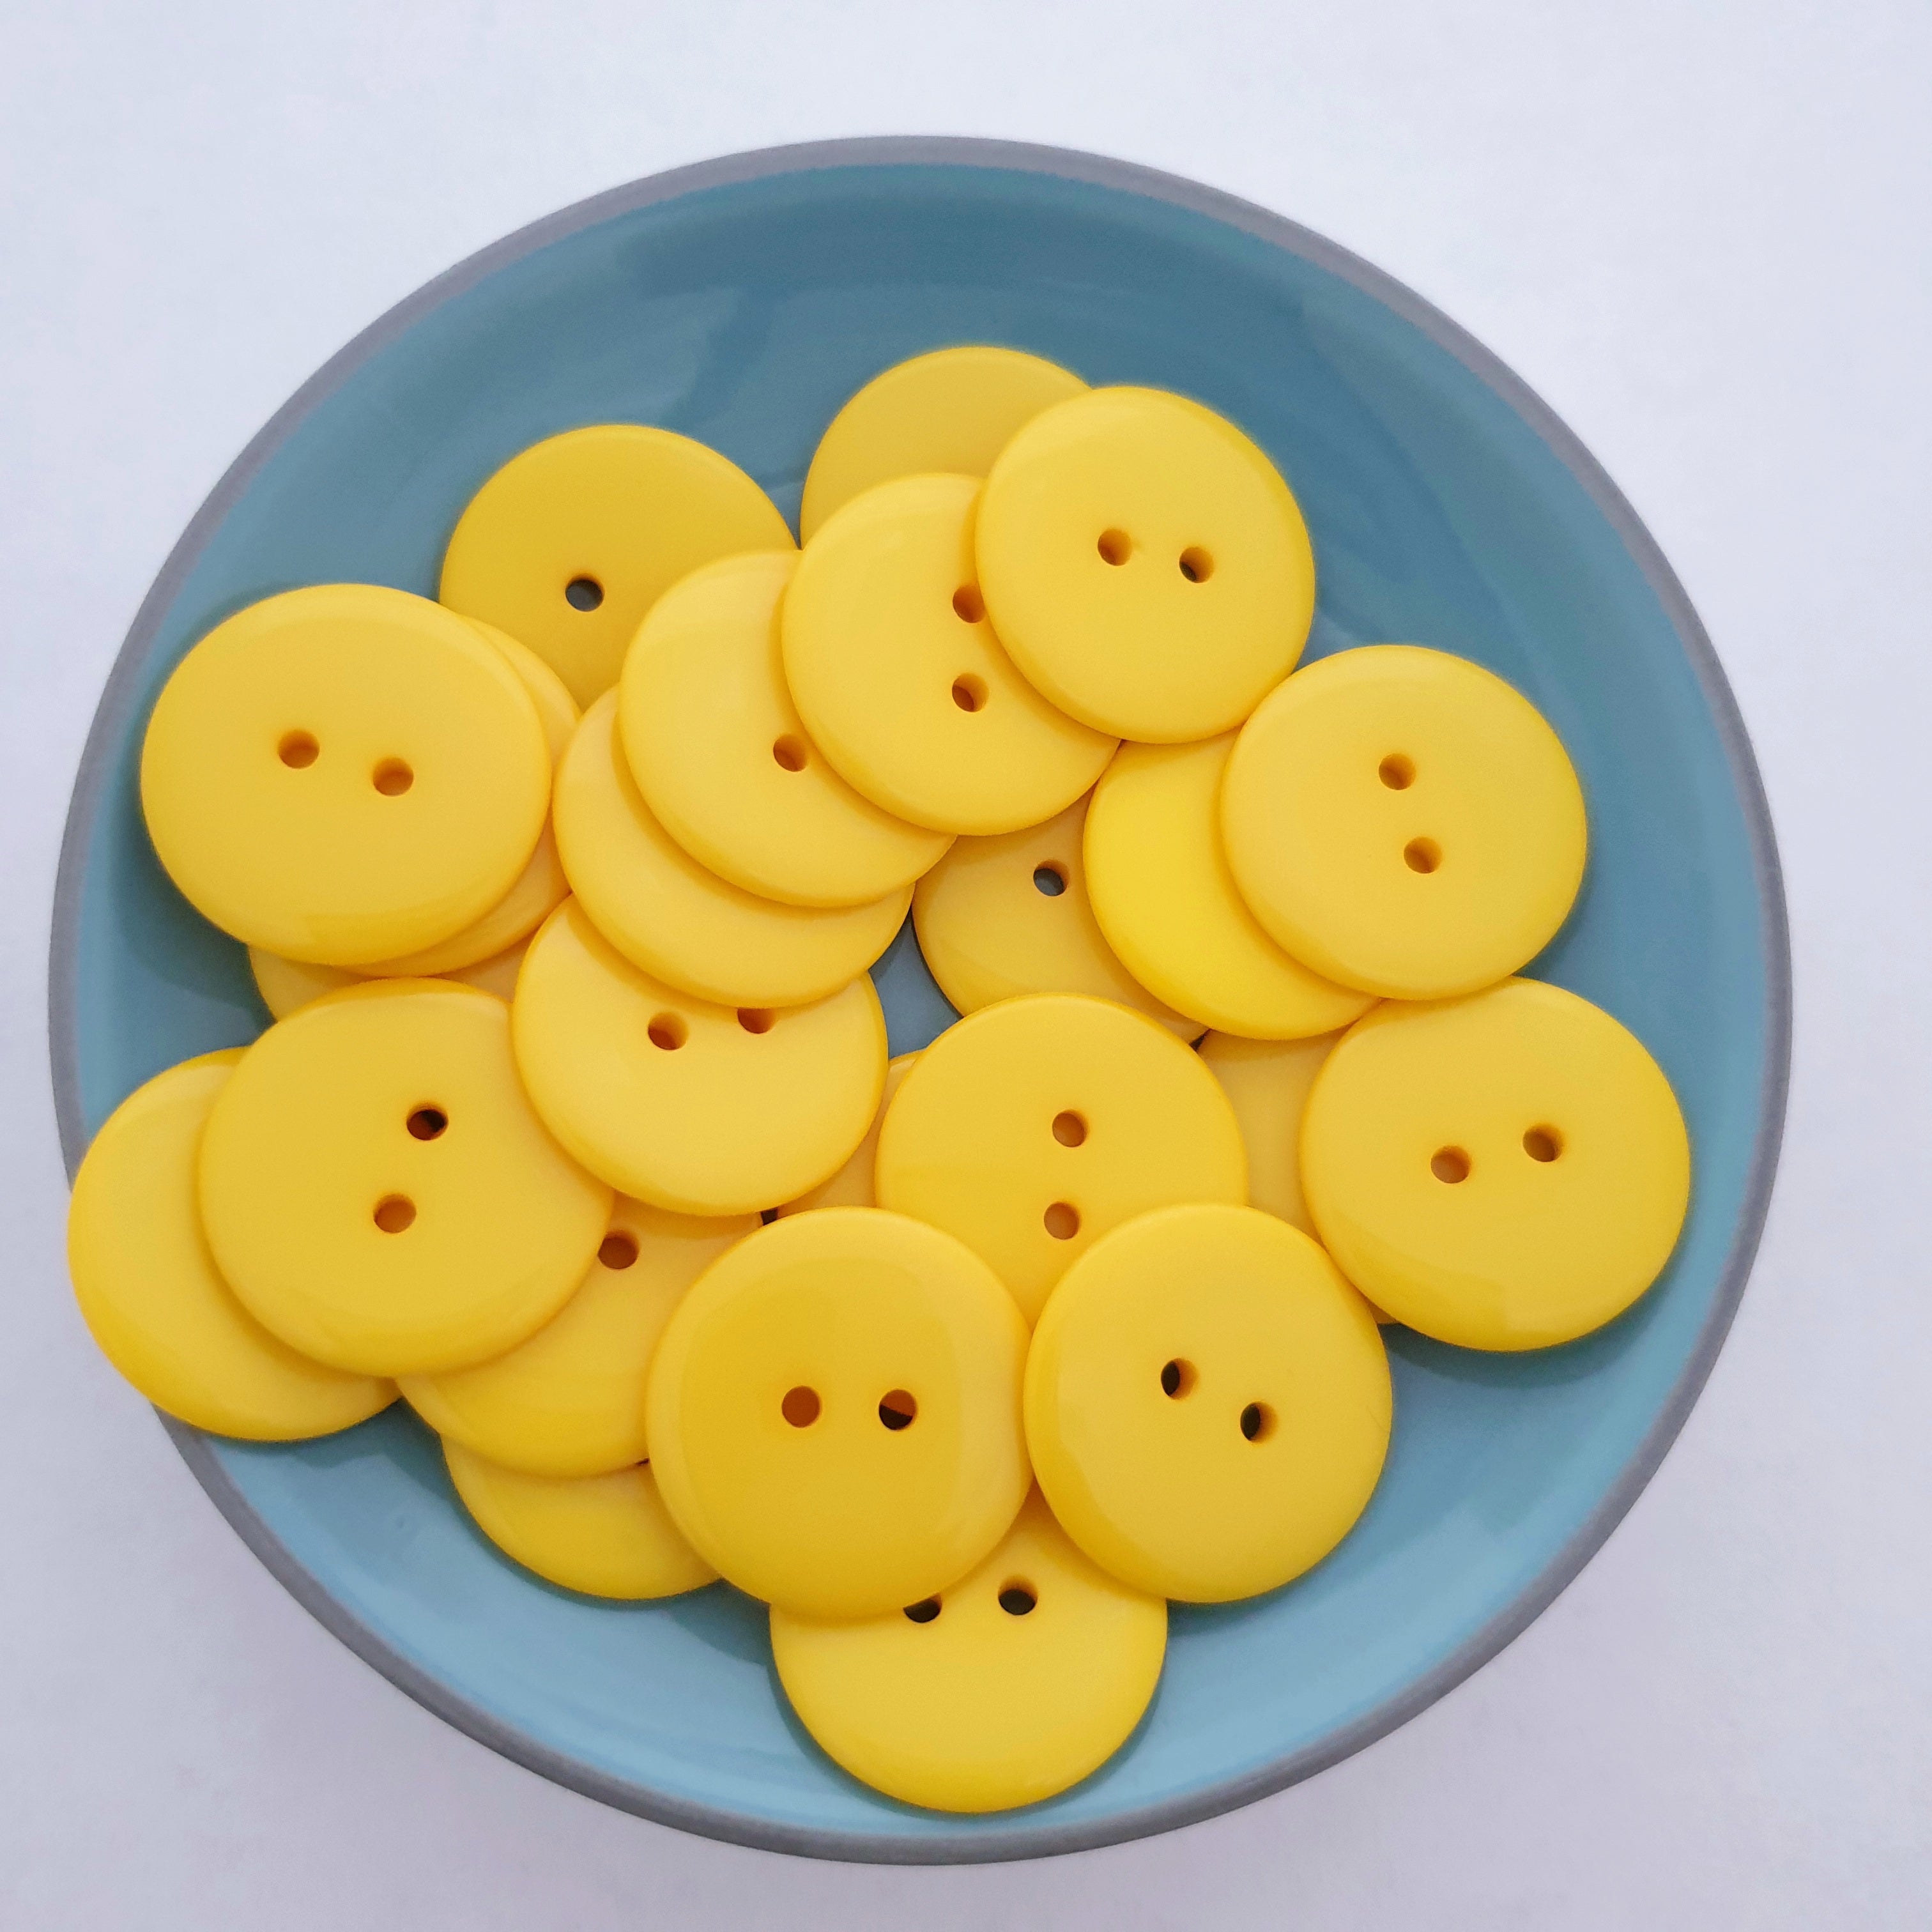 MajorCrafts 36pcs 23mm Yellow 2 Holes Round Large Resin Sewing Buttons